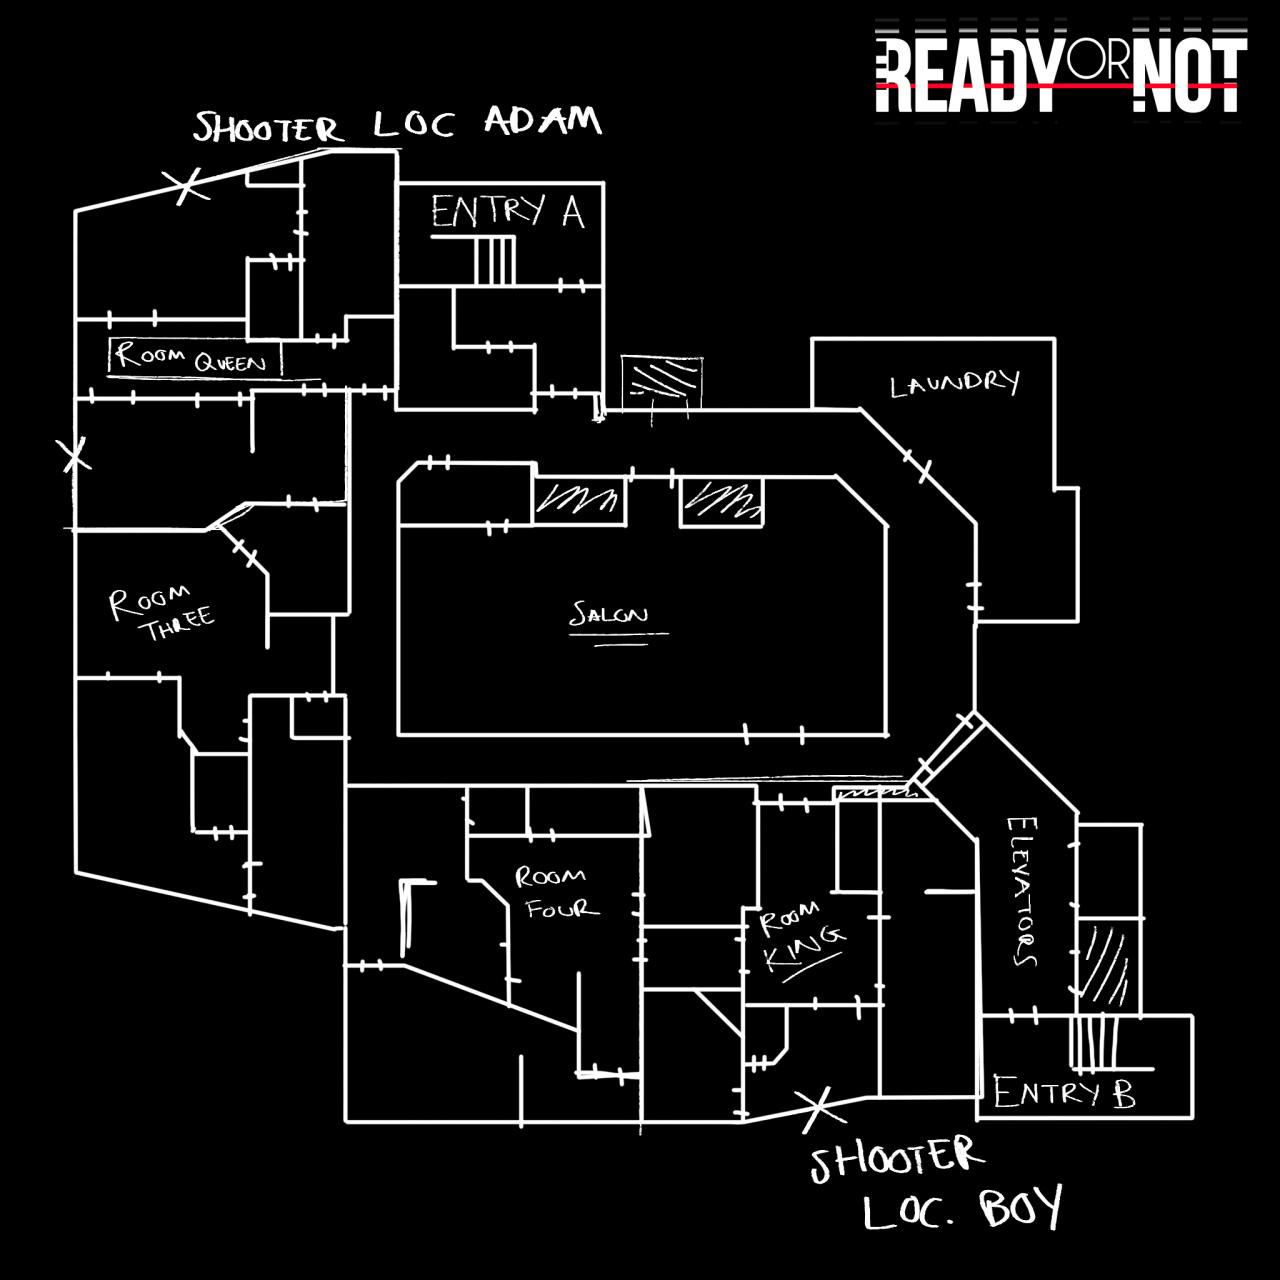 Ready or Not Map Blueprints Guide